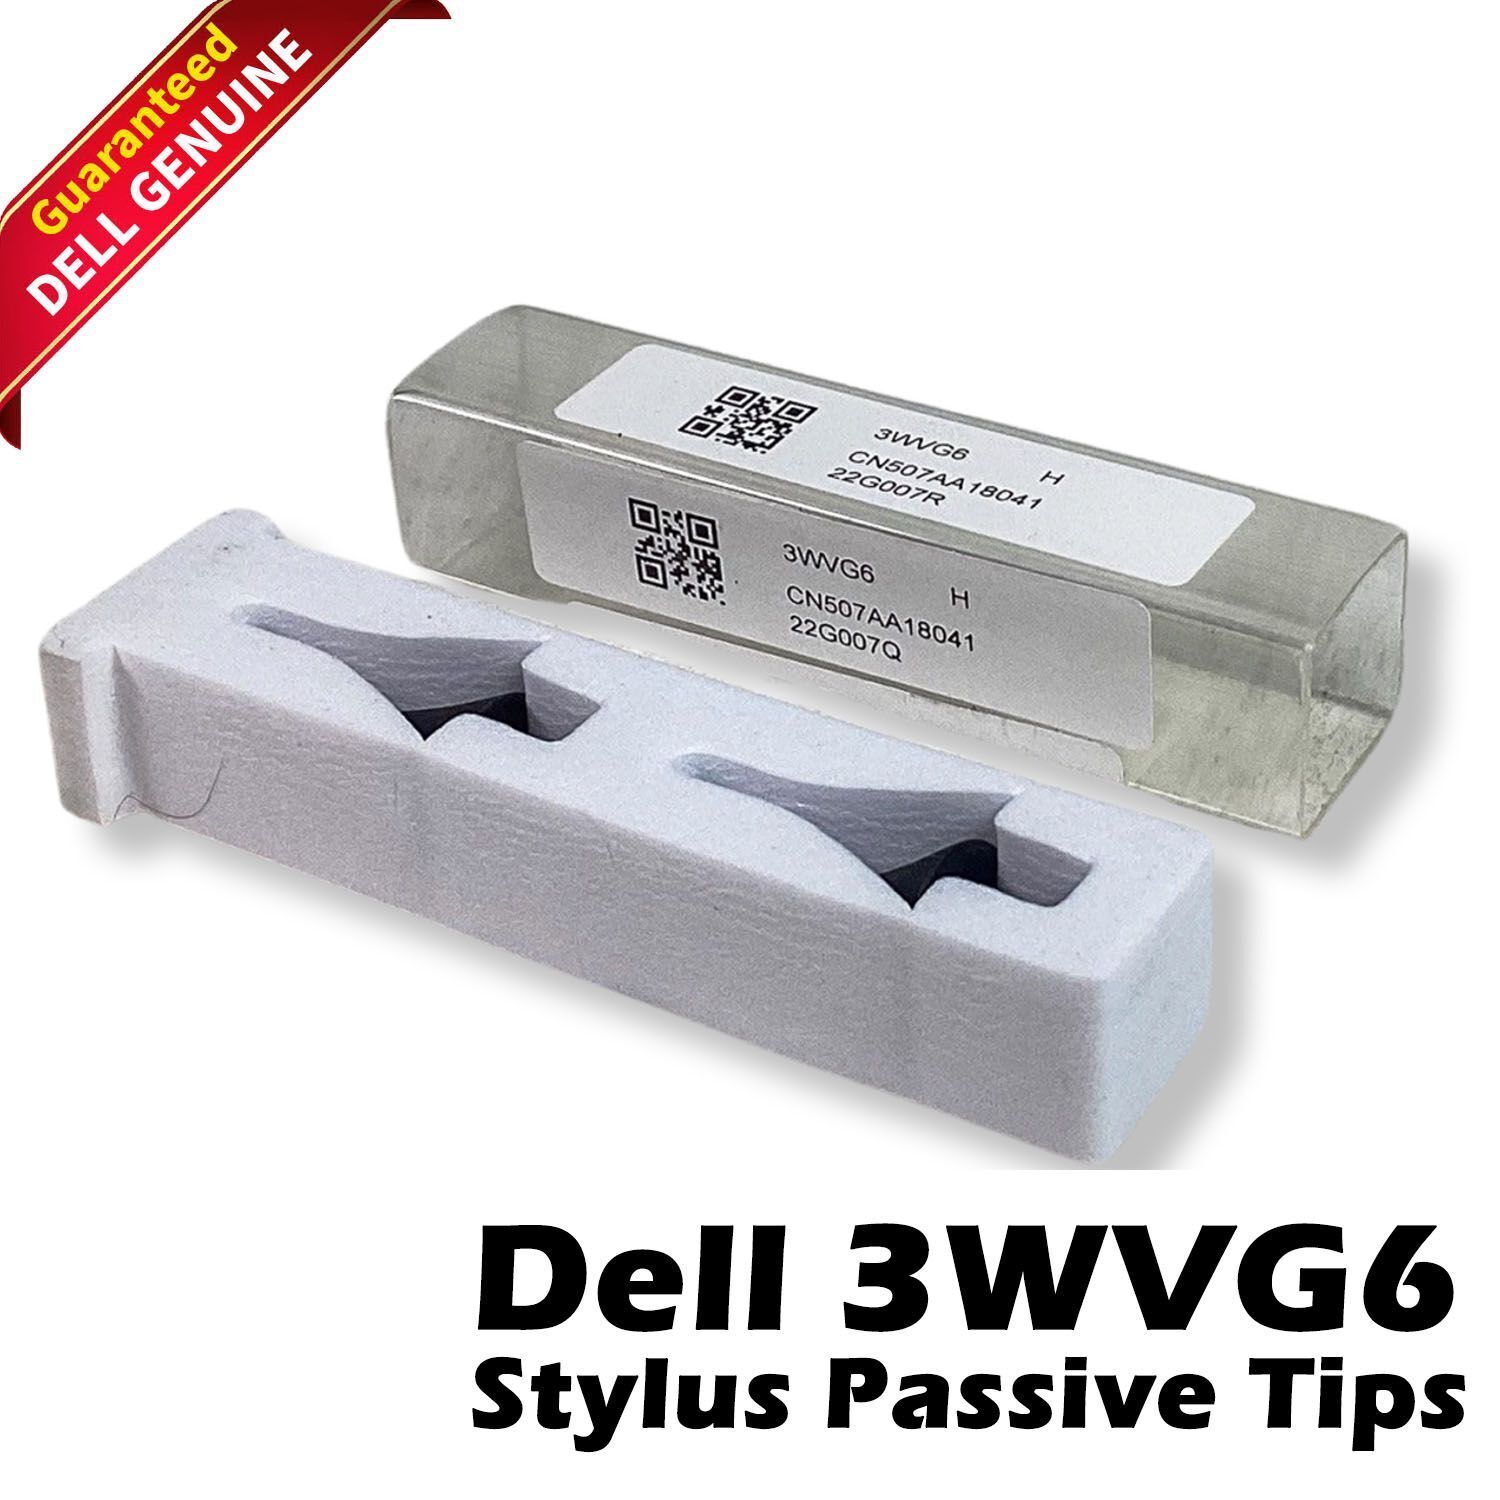 Genuine Dell Stylus Passive Replacement Tips 760.05N0M.0001 3WVG6